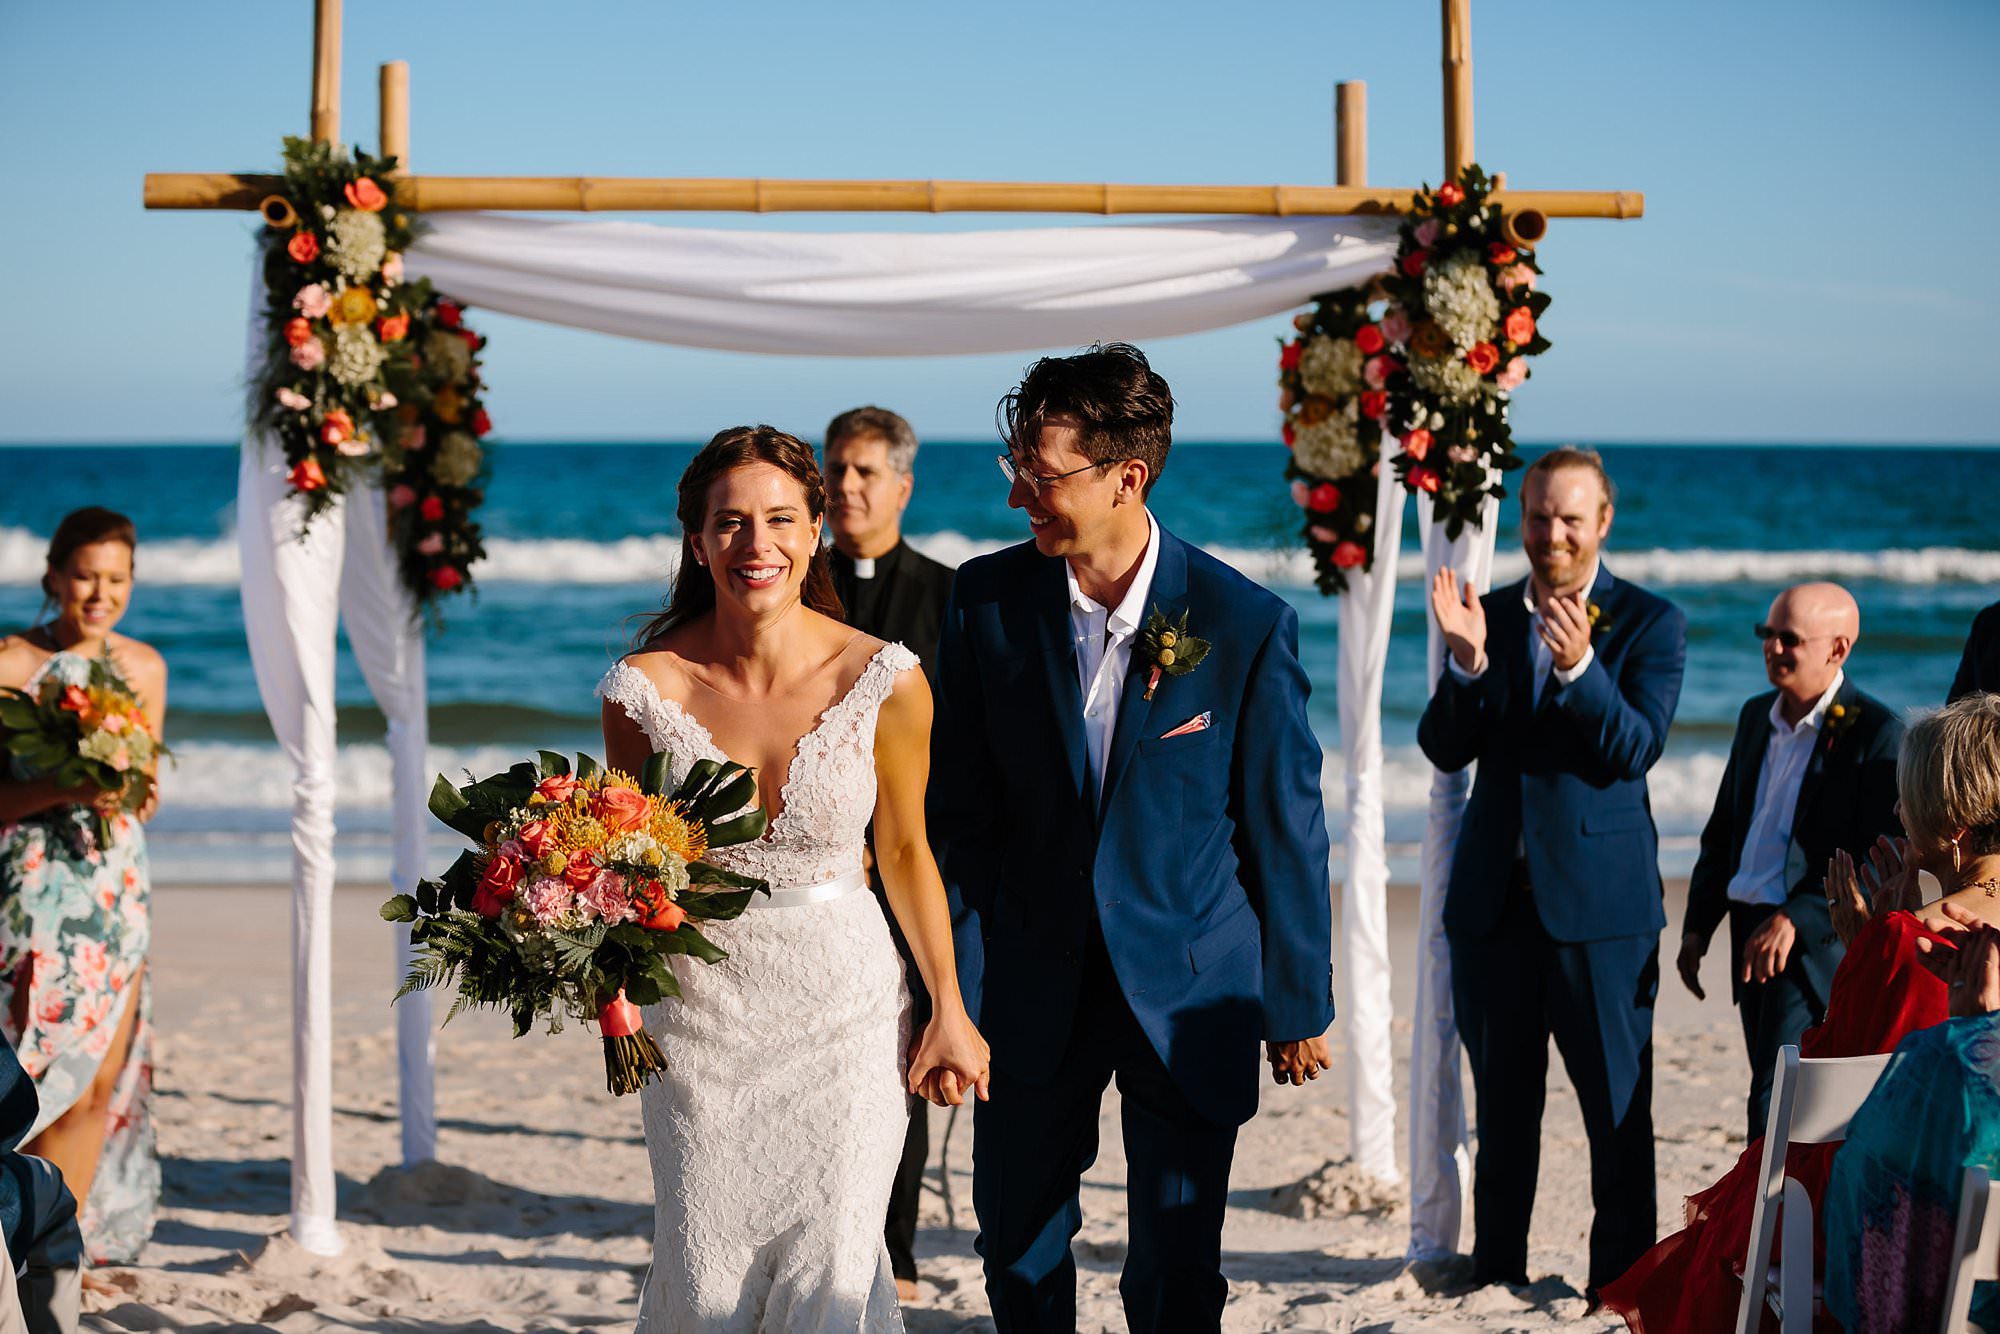 Bride and groom recessional at beach ceremony on St George Island Fl